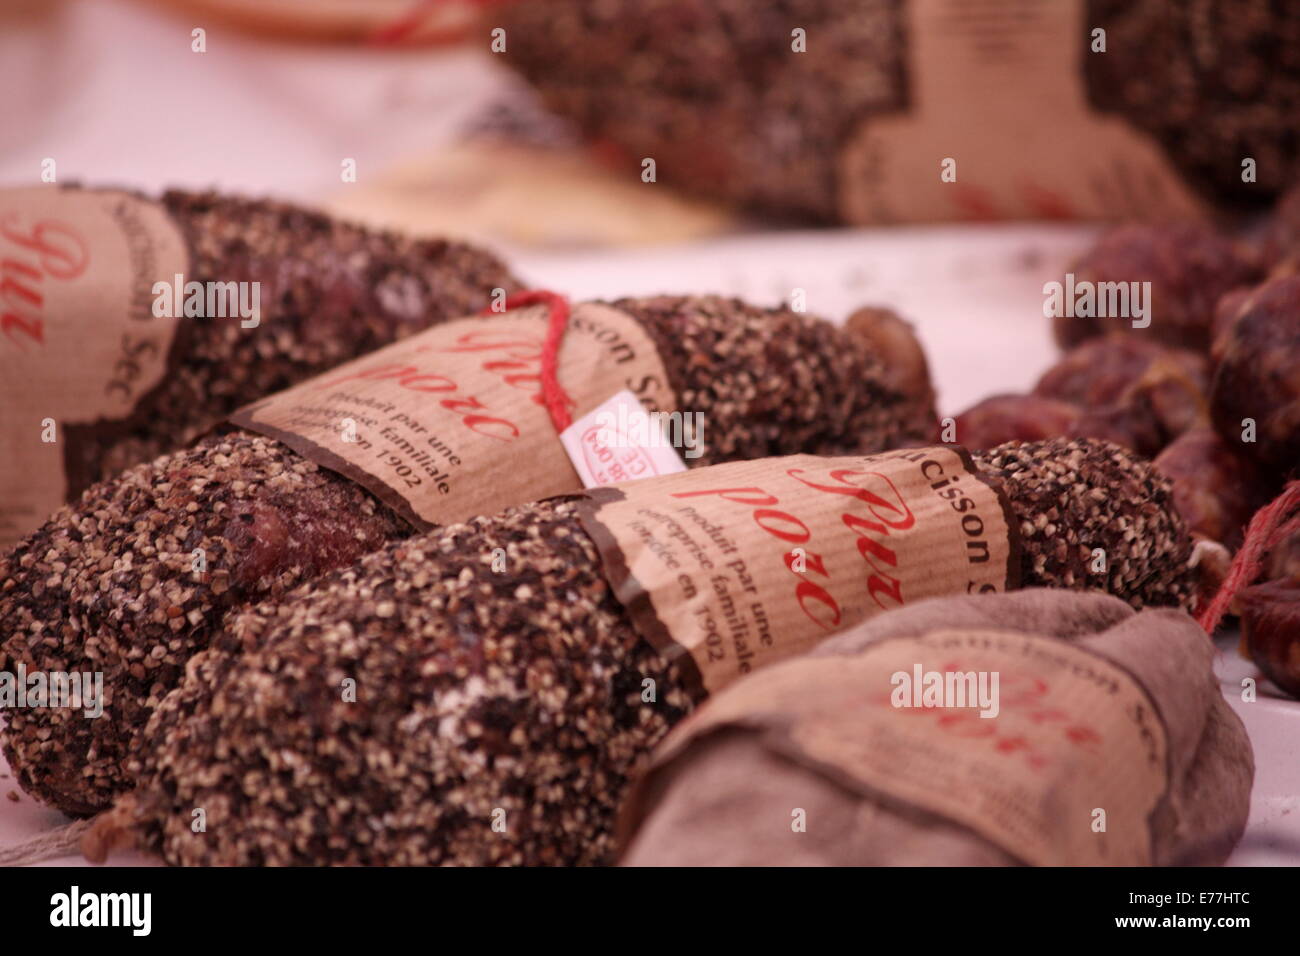 Cured sausages in french market in Sommieres Stock Photo